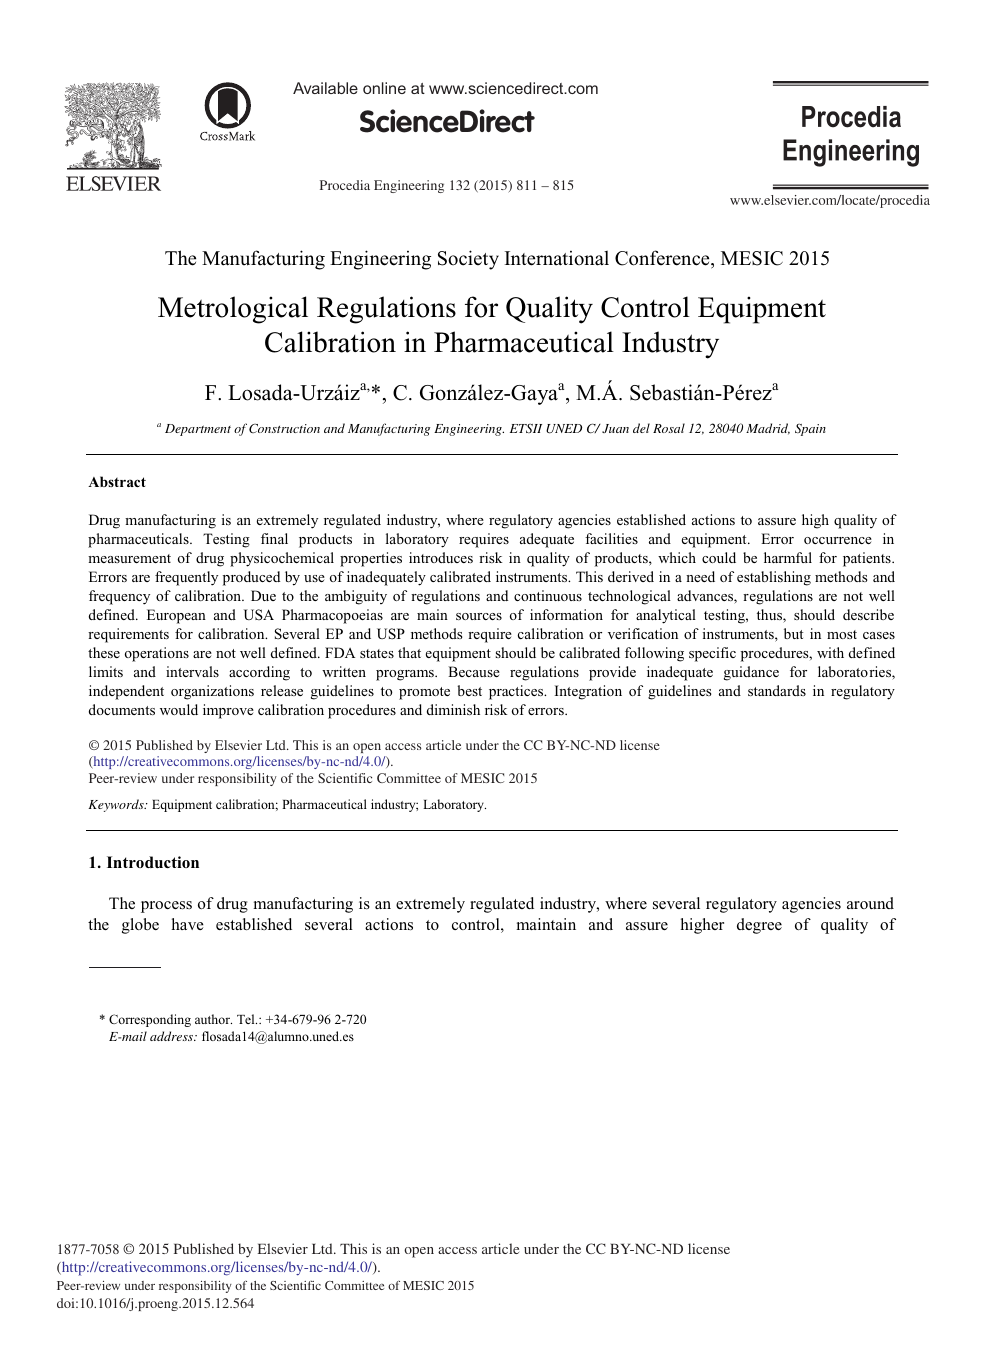 Metrological Regulations For Quality Control Equipment Calibration In Pharmaceutical Industry Topic Of Research Paper In Materials Engineering Download Scholarly Article Pdf And Read For Free On Cyberleninka Open Science Hub